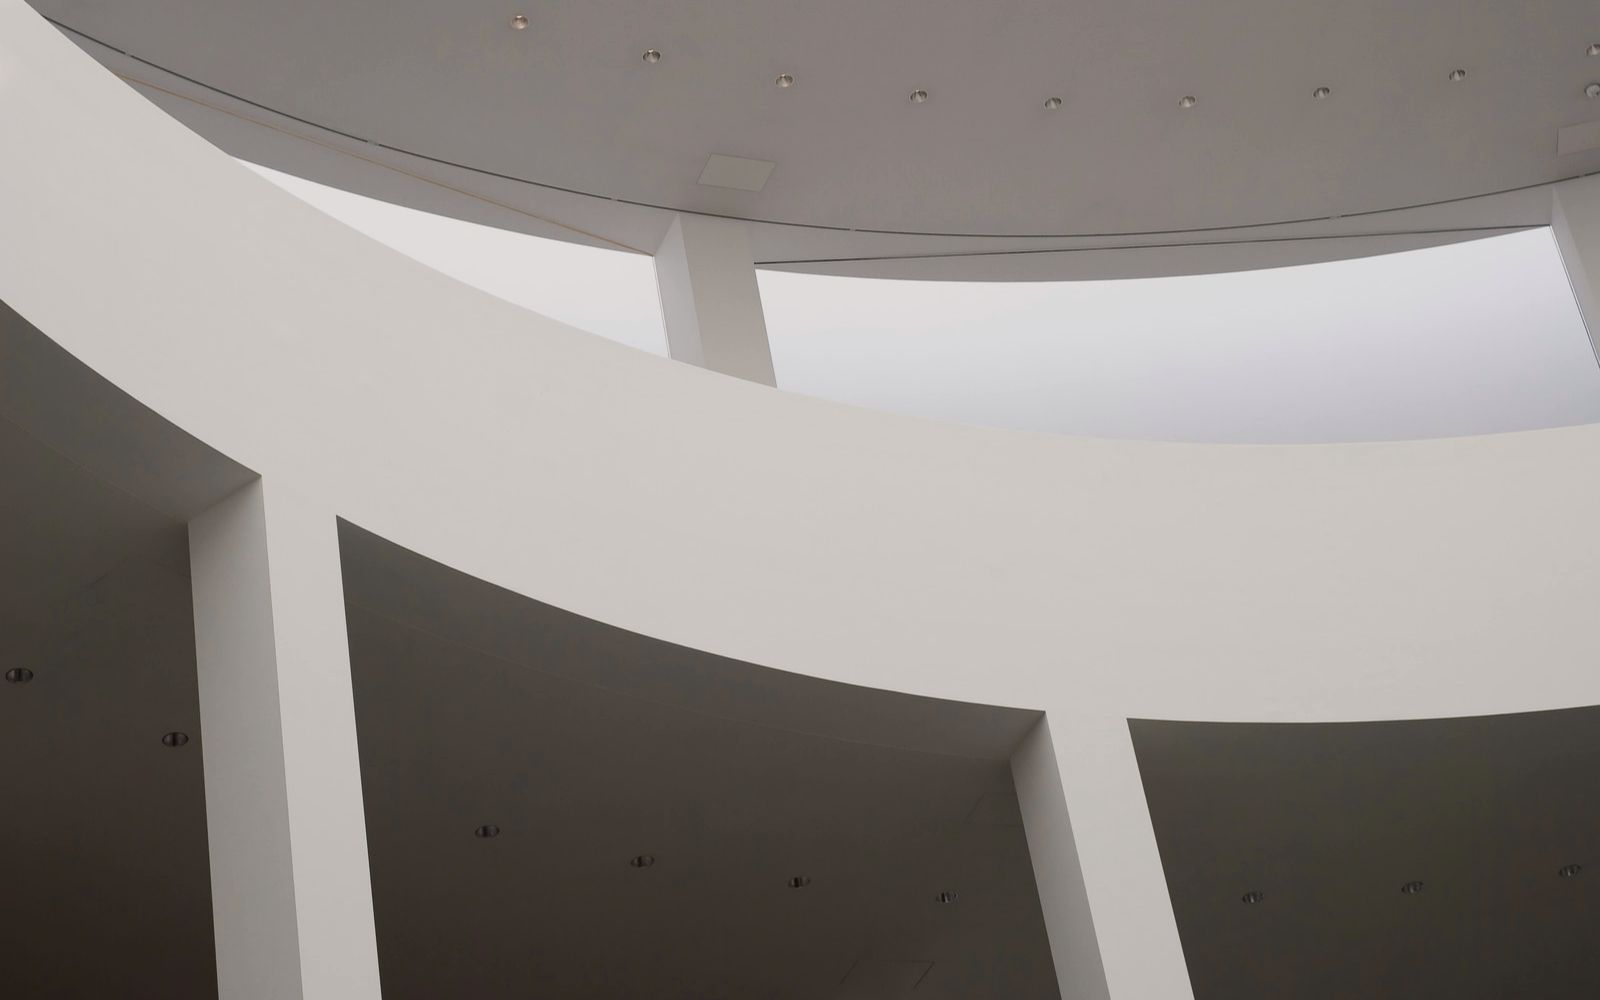 White curved architecture interior of a building.